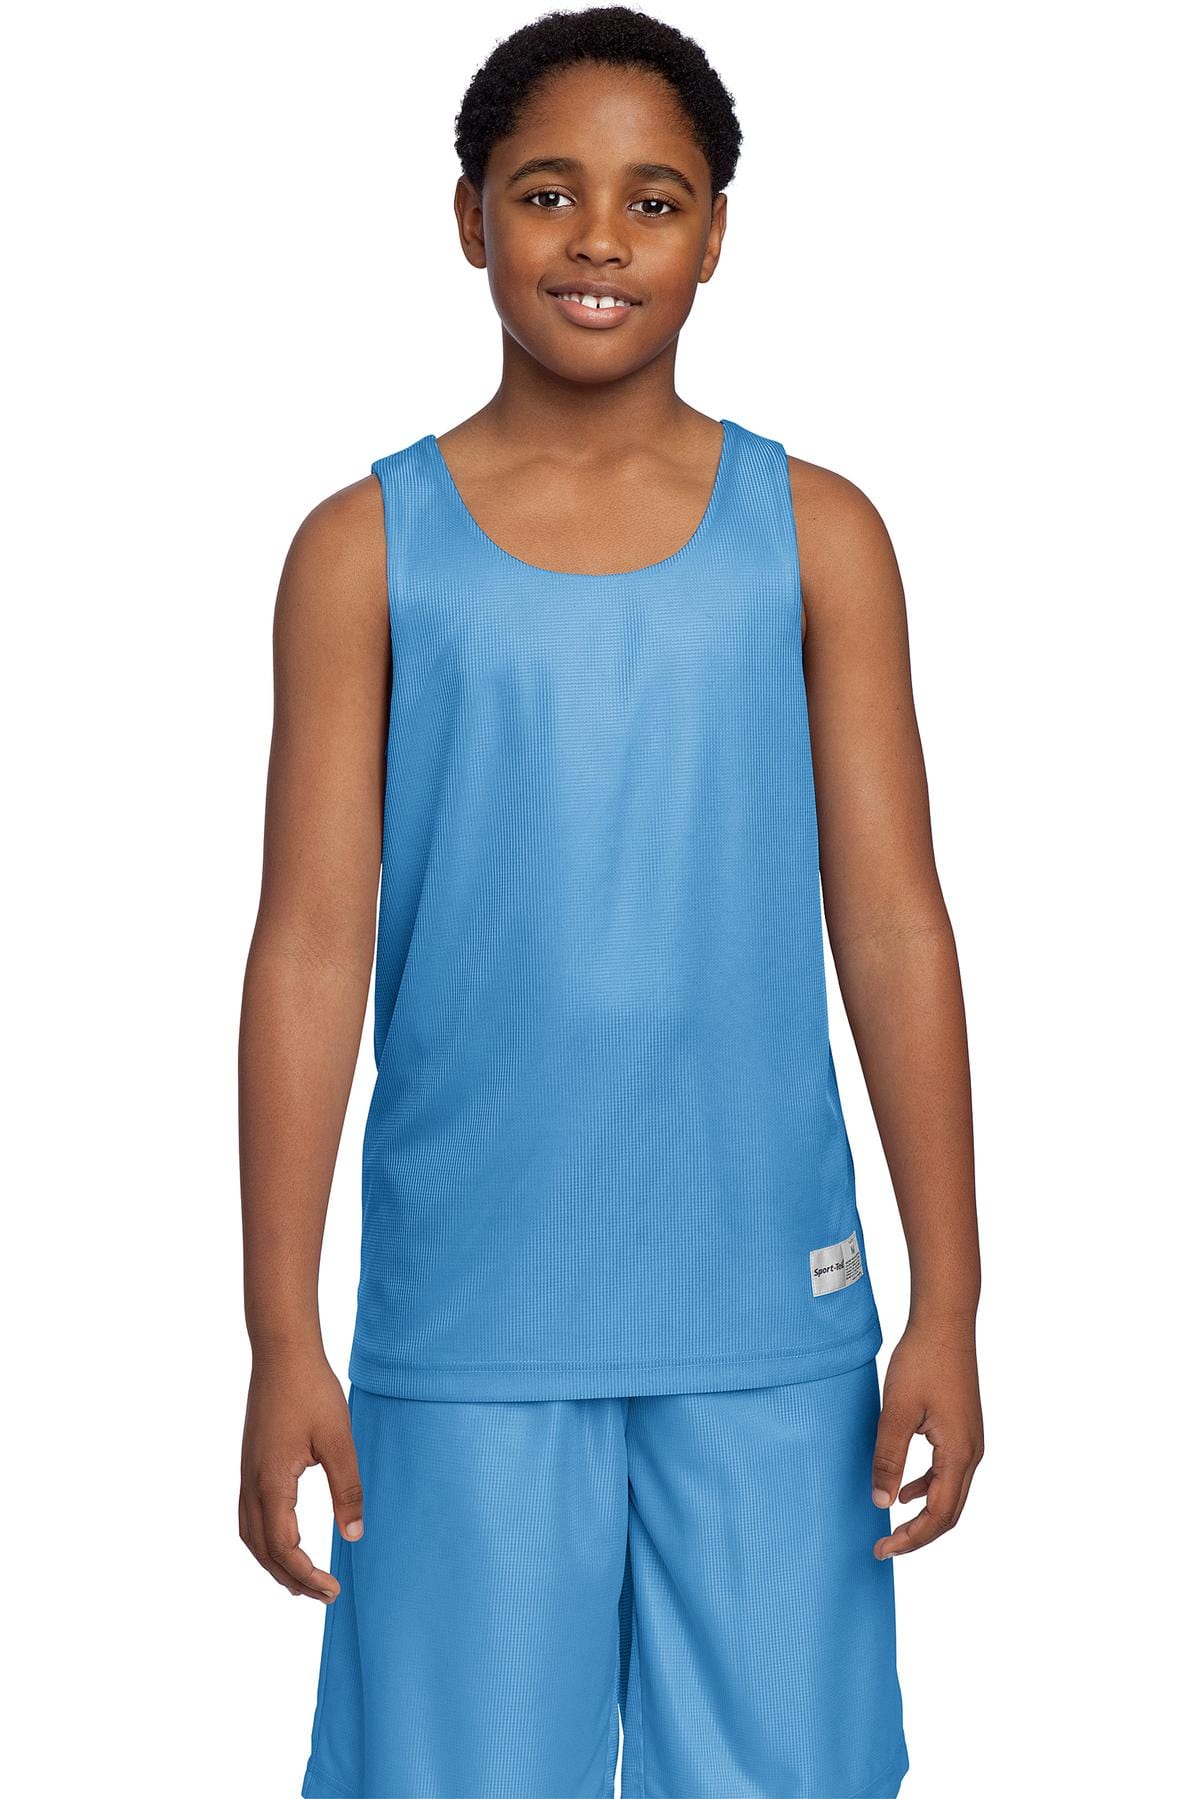 DISCONTINUED Sport-Tek ® Youth PosiCharge ® Mesh Reversible Tank